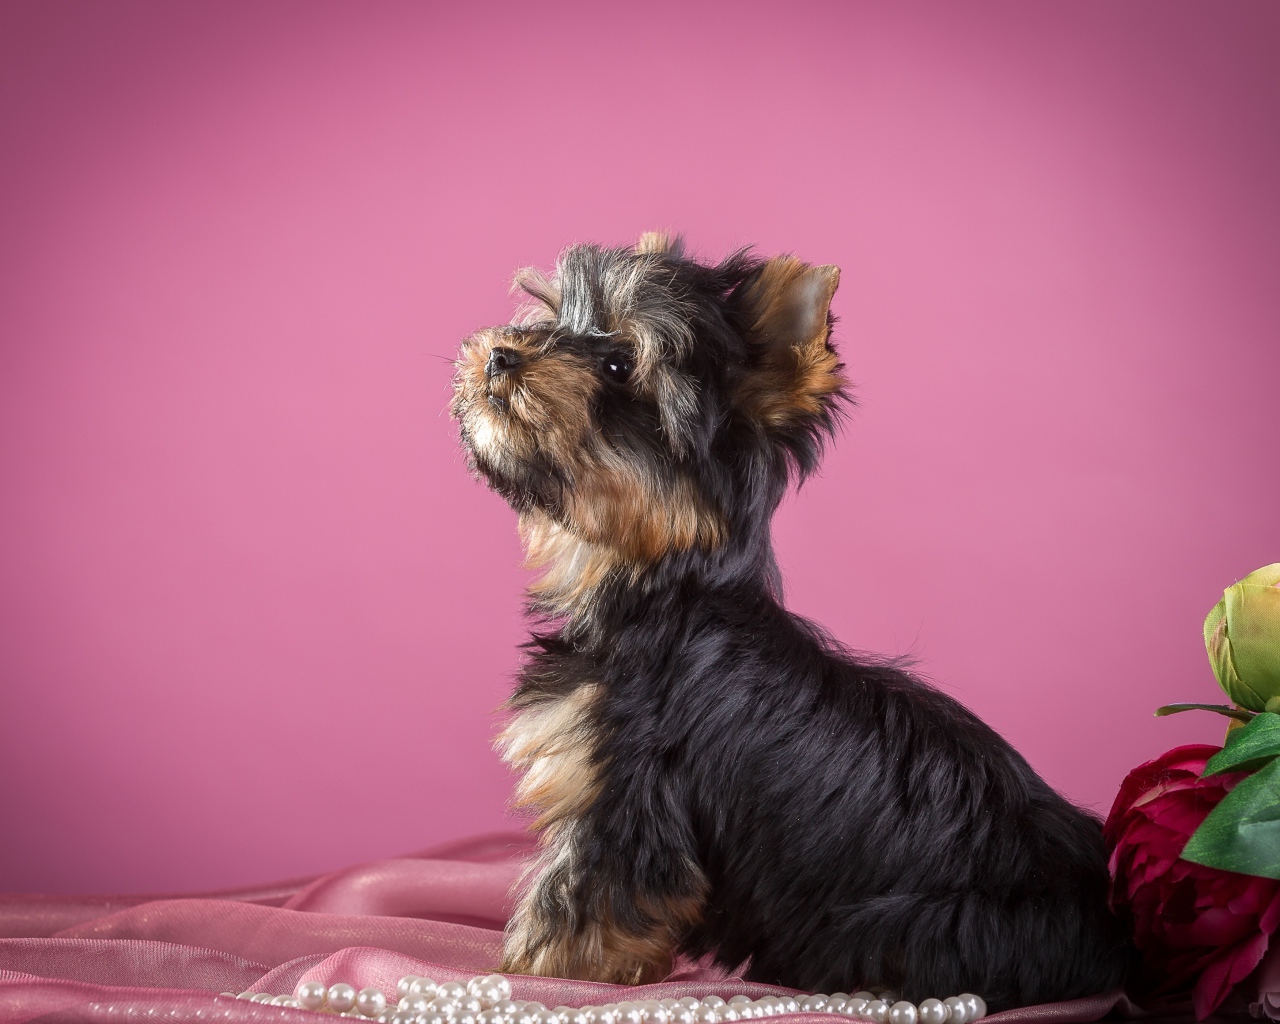 Yorkshire terrier sitting on a pink background with flowers and beads.